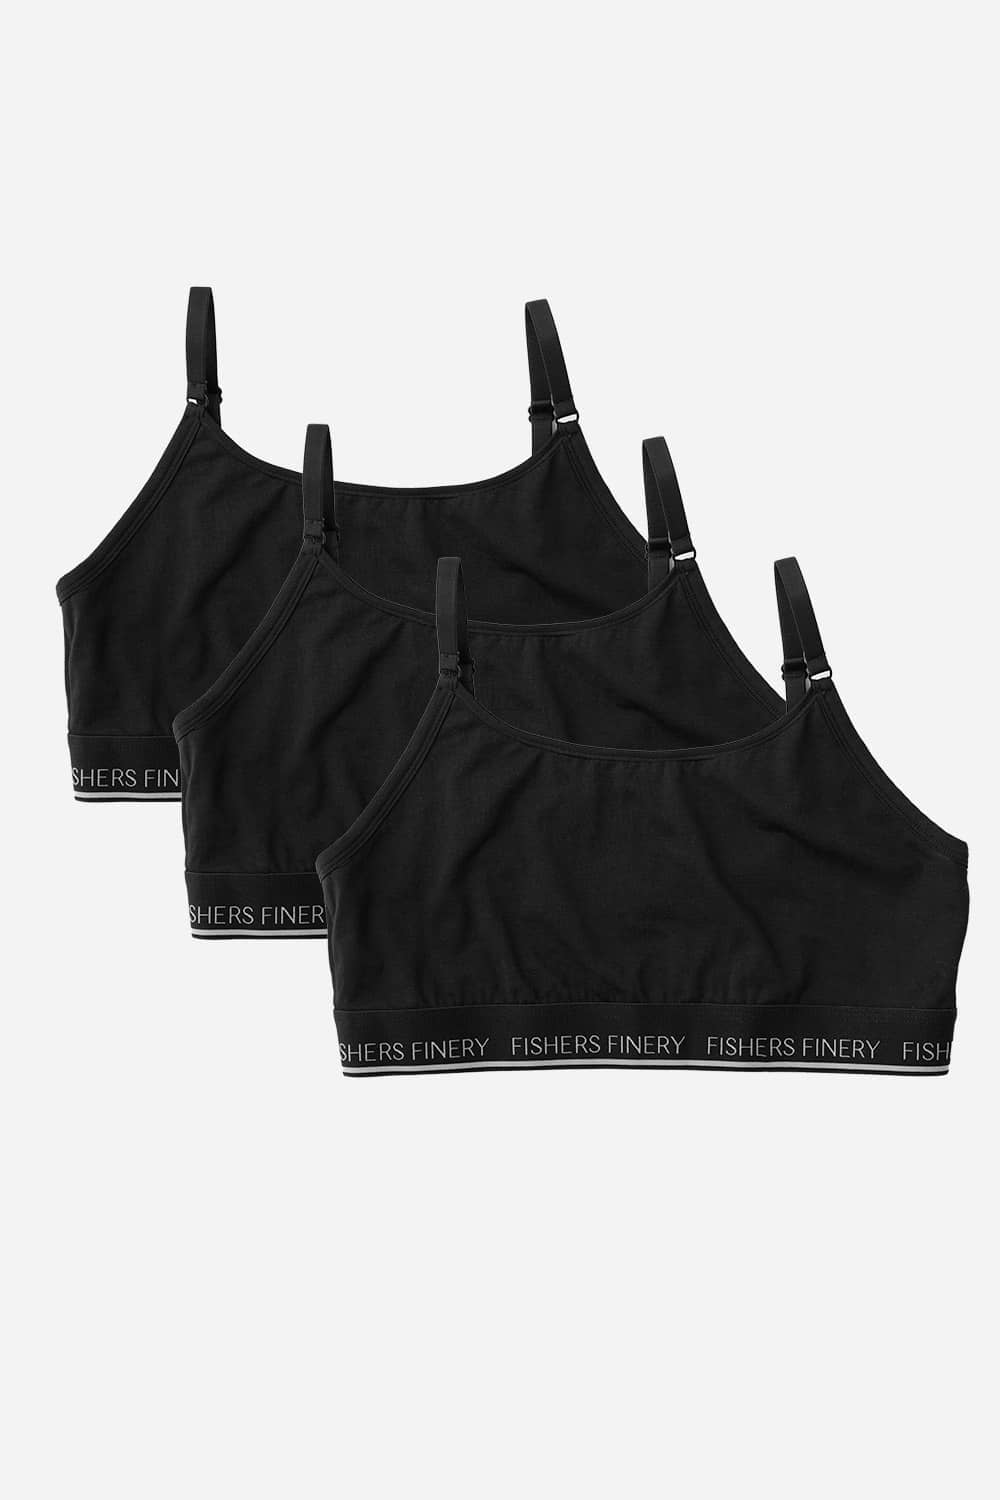 Women's Everyday Lightweight Adjustable Bralette Womens>Casual>Bra Fishers Finery Black X-Small 3 Pack